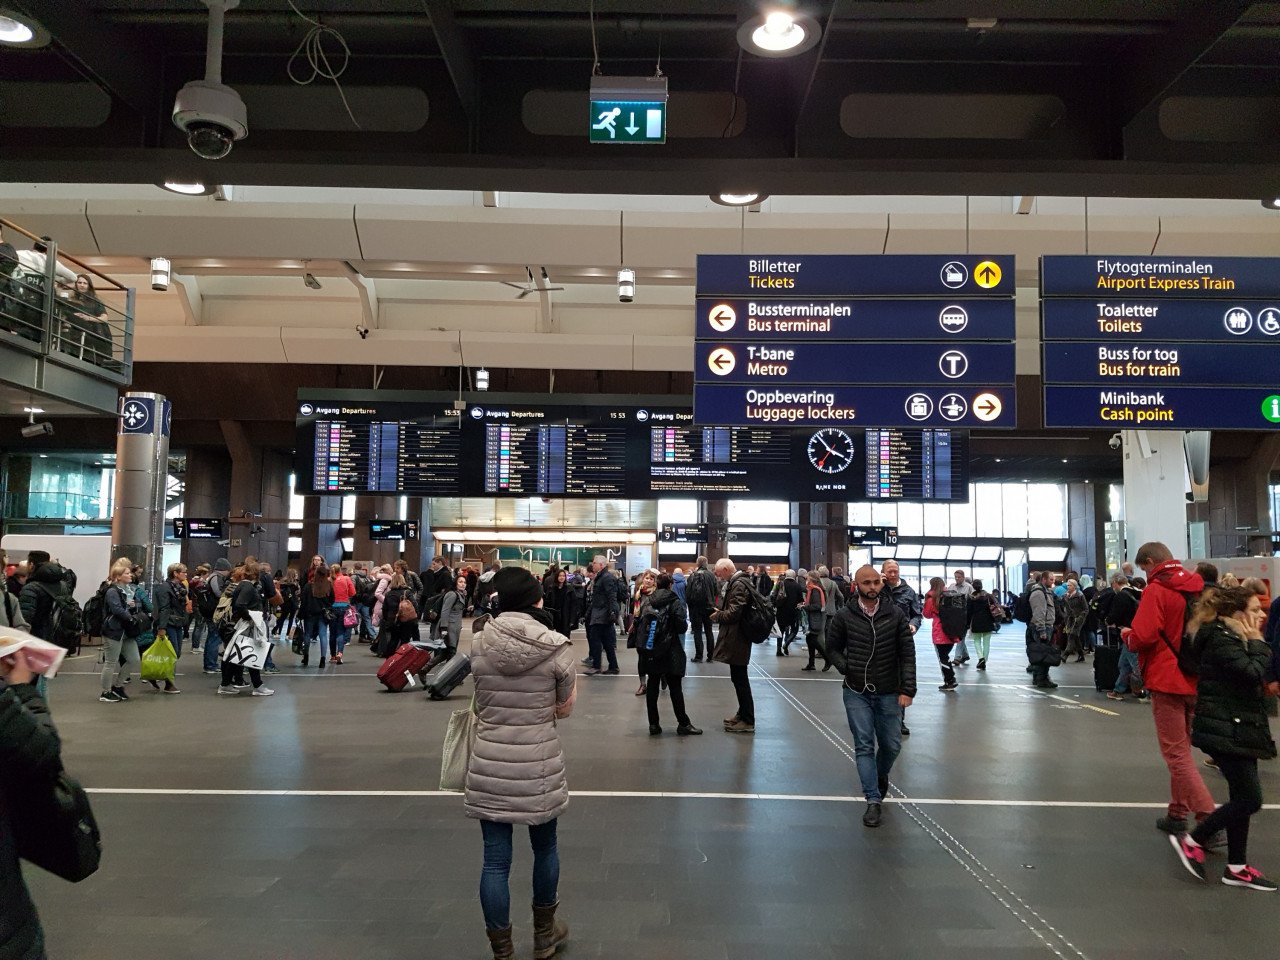 Oslo Central Station